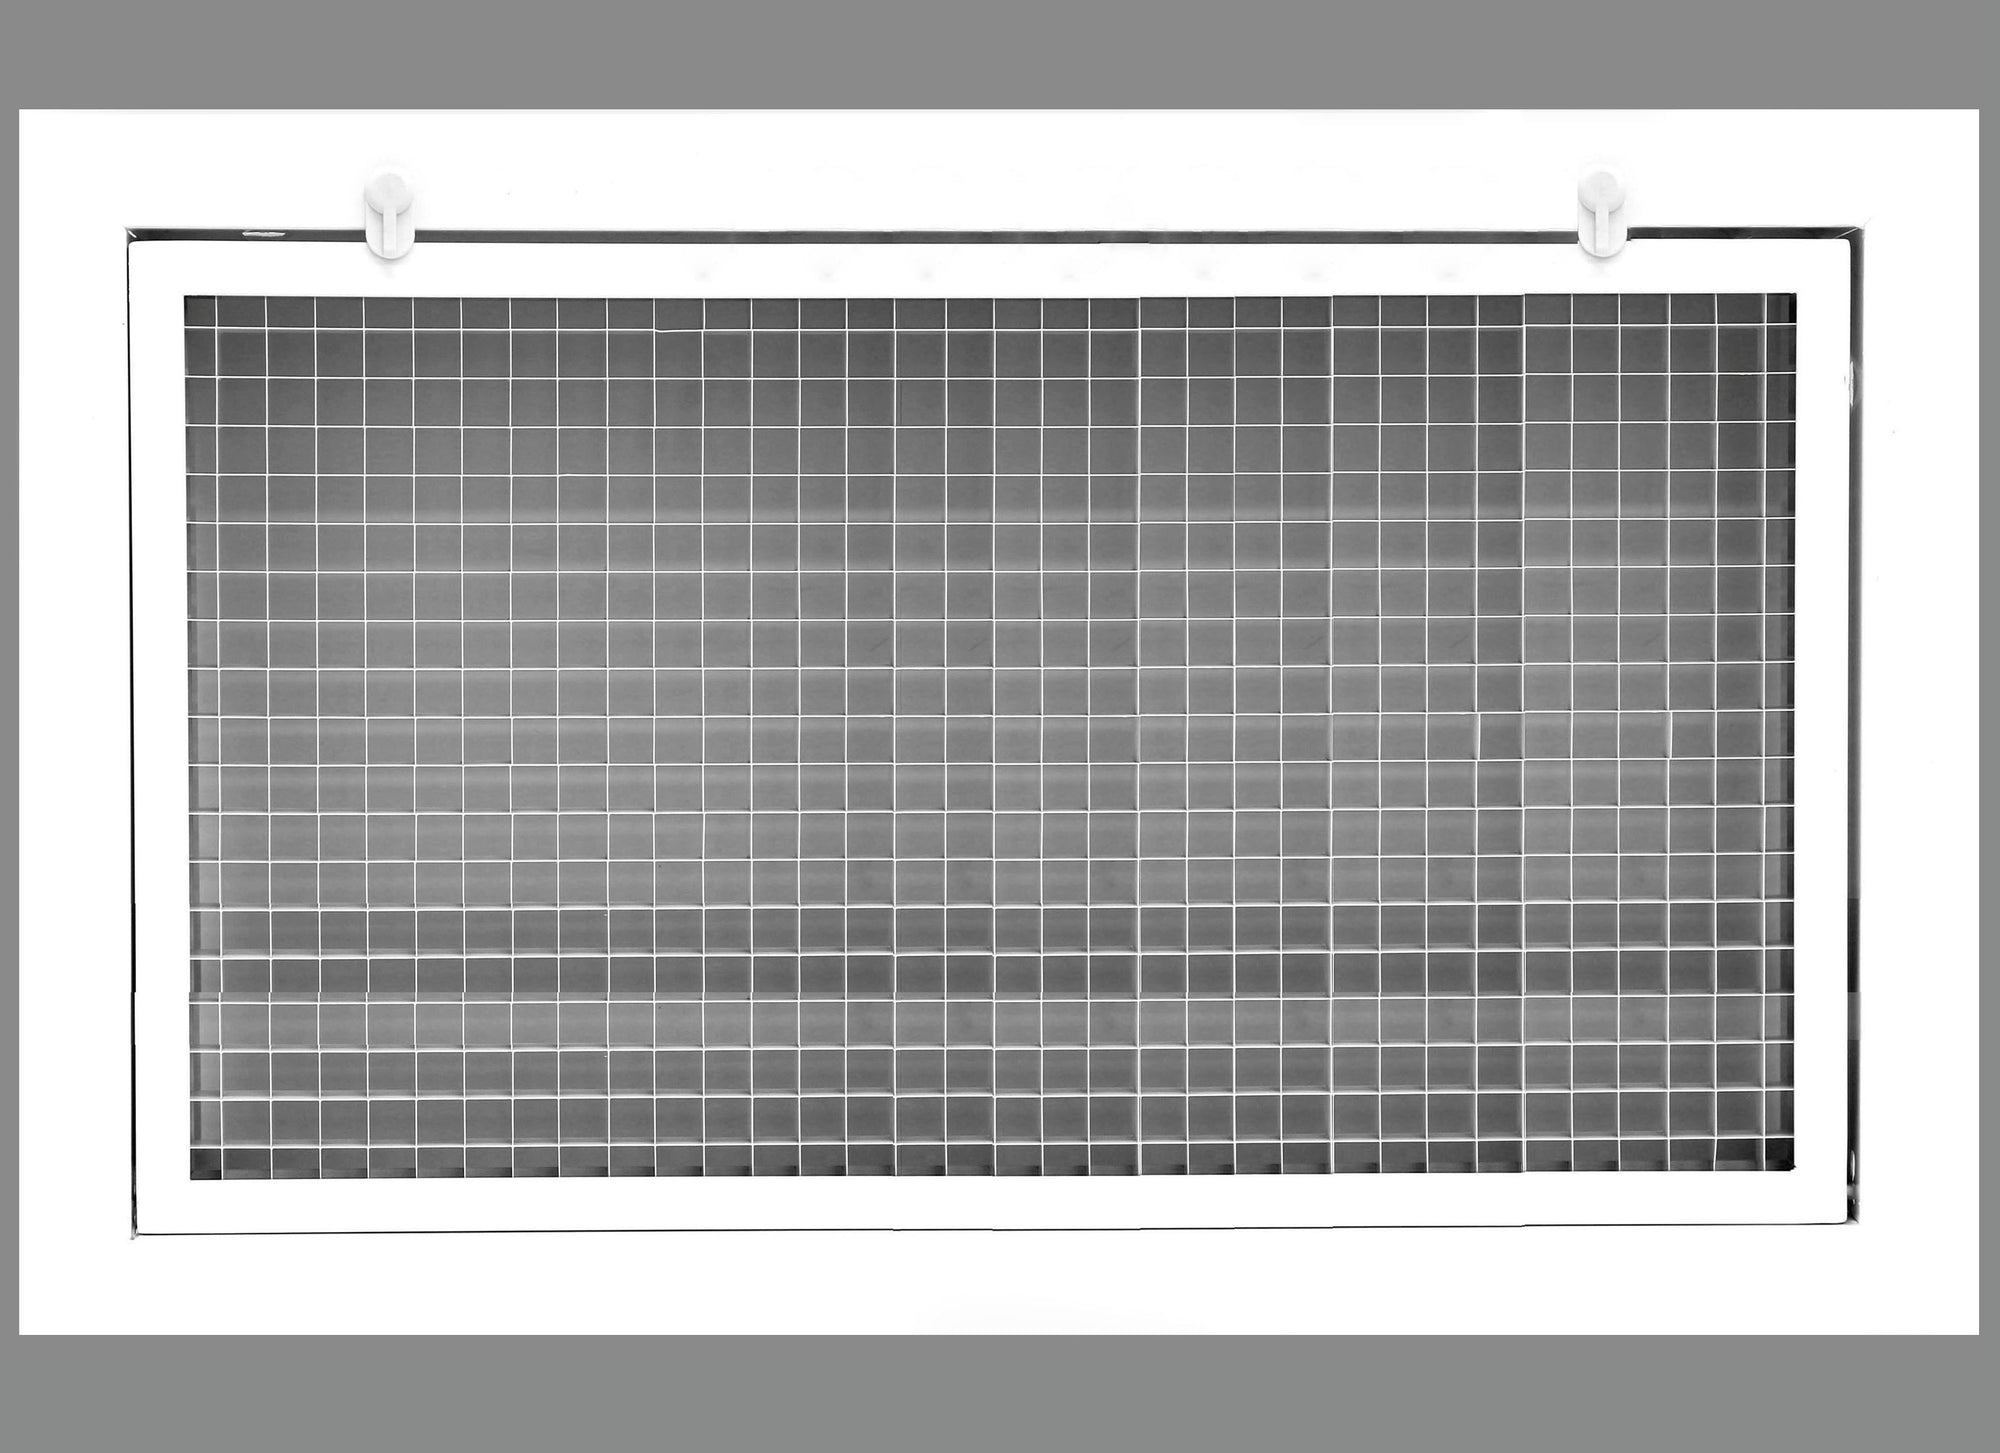 28" x 16" Cube Core Eggcrate Return Air Filter Grille for 1" Filter